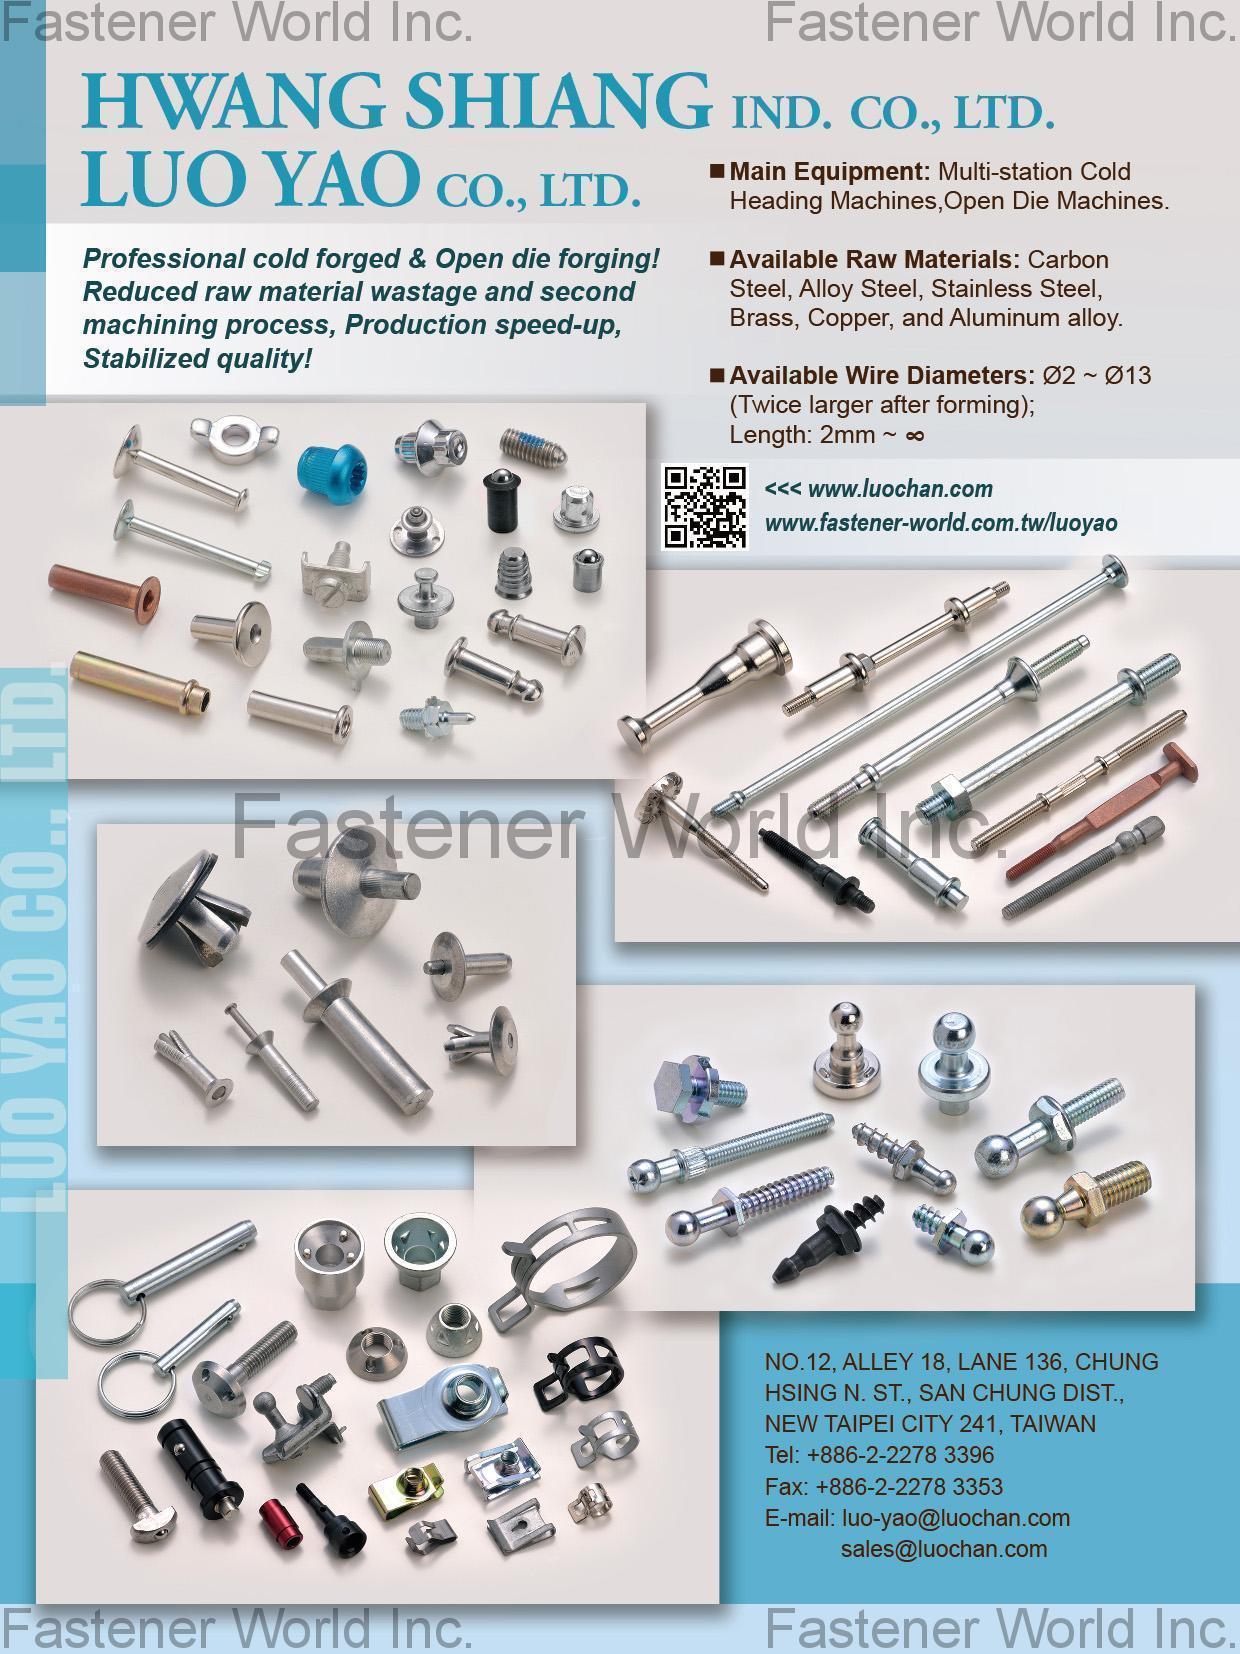 LUO YAO CO., LTD. / Hwang Shiang Ind. Co., Ltd. , Cold Forged & Open Die Forging , Open Die Screw